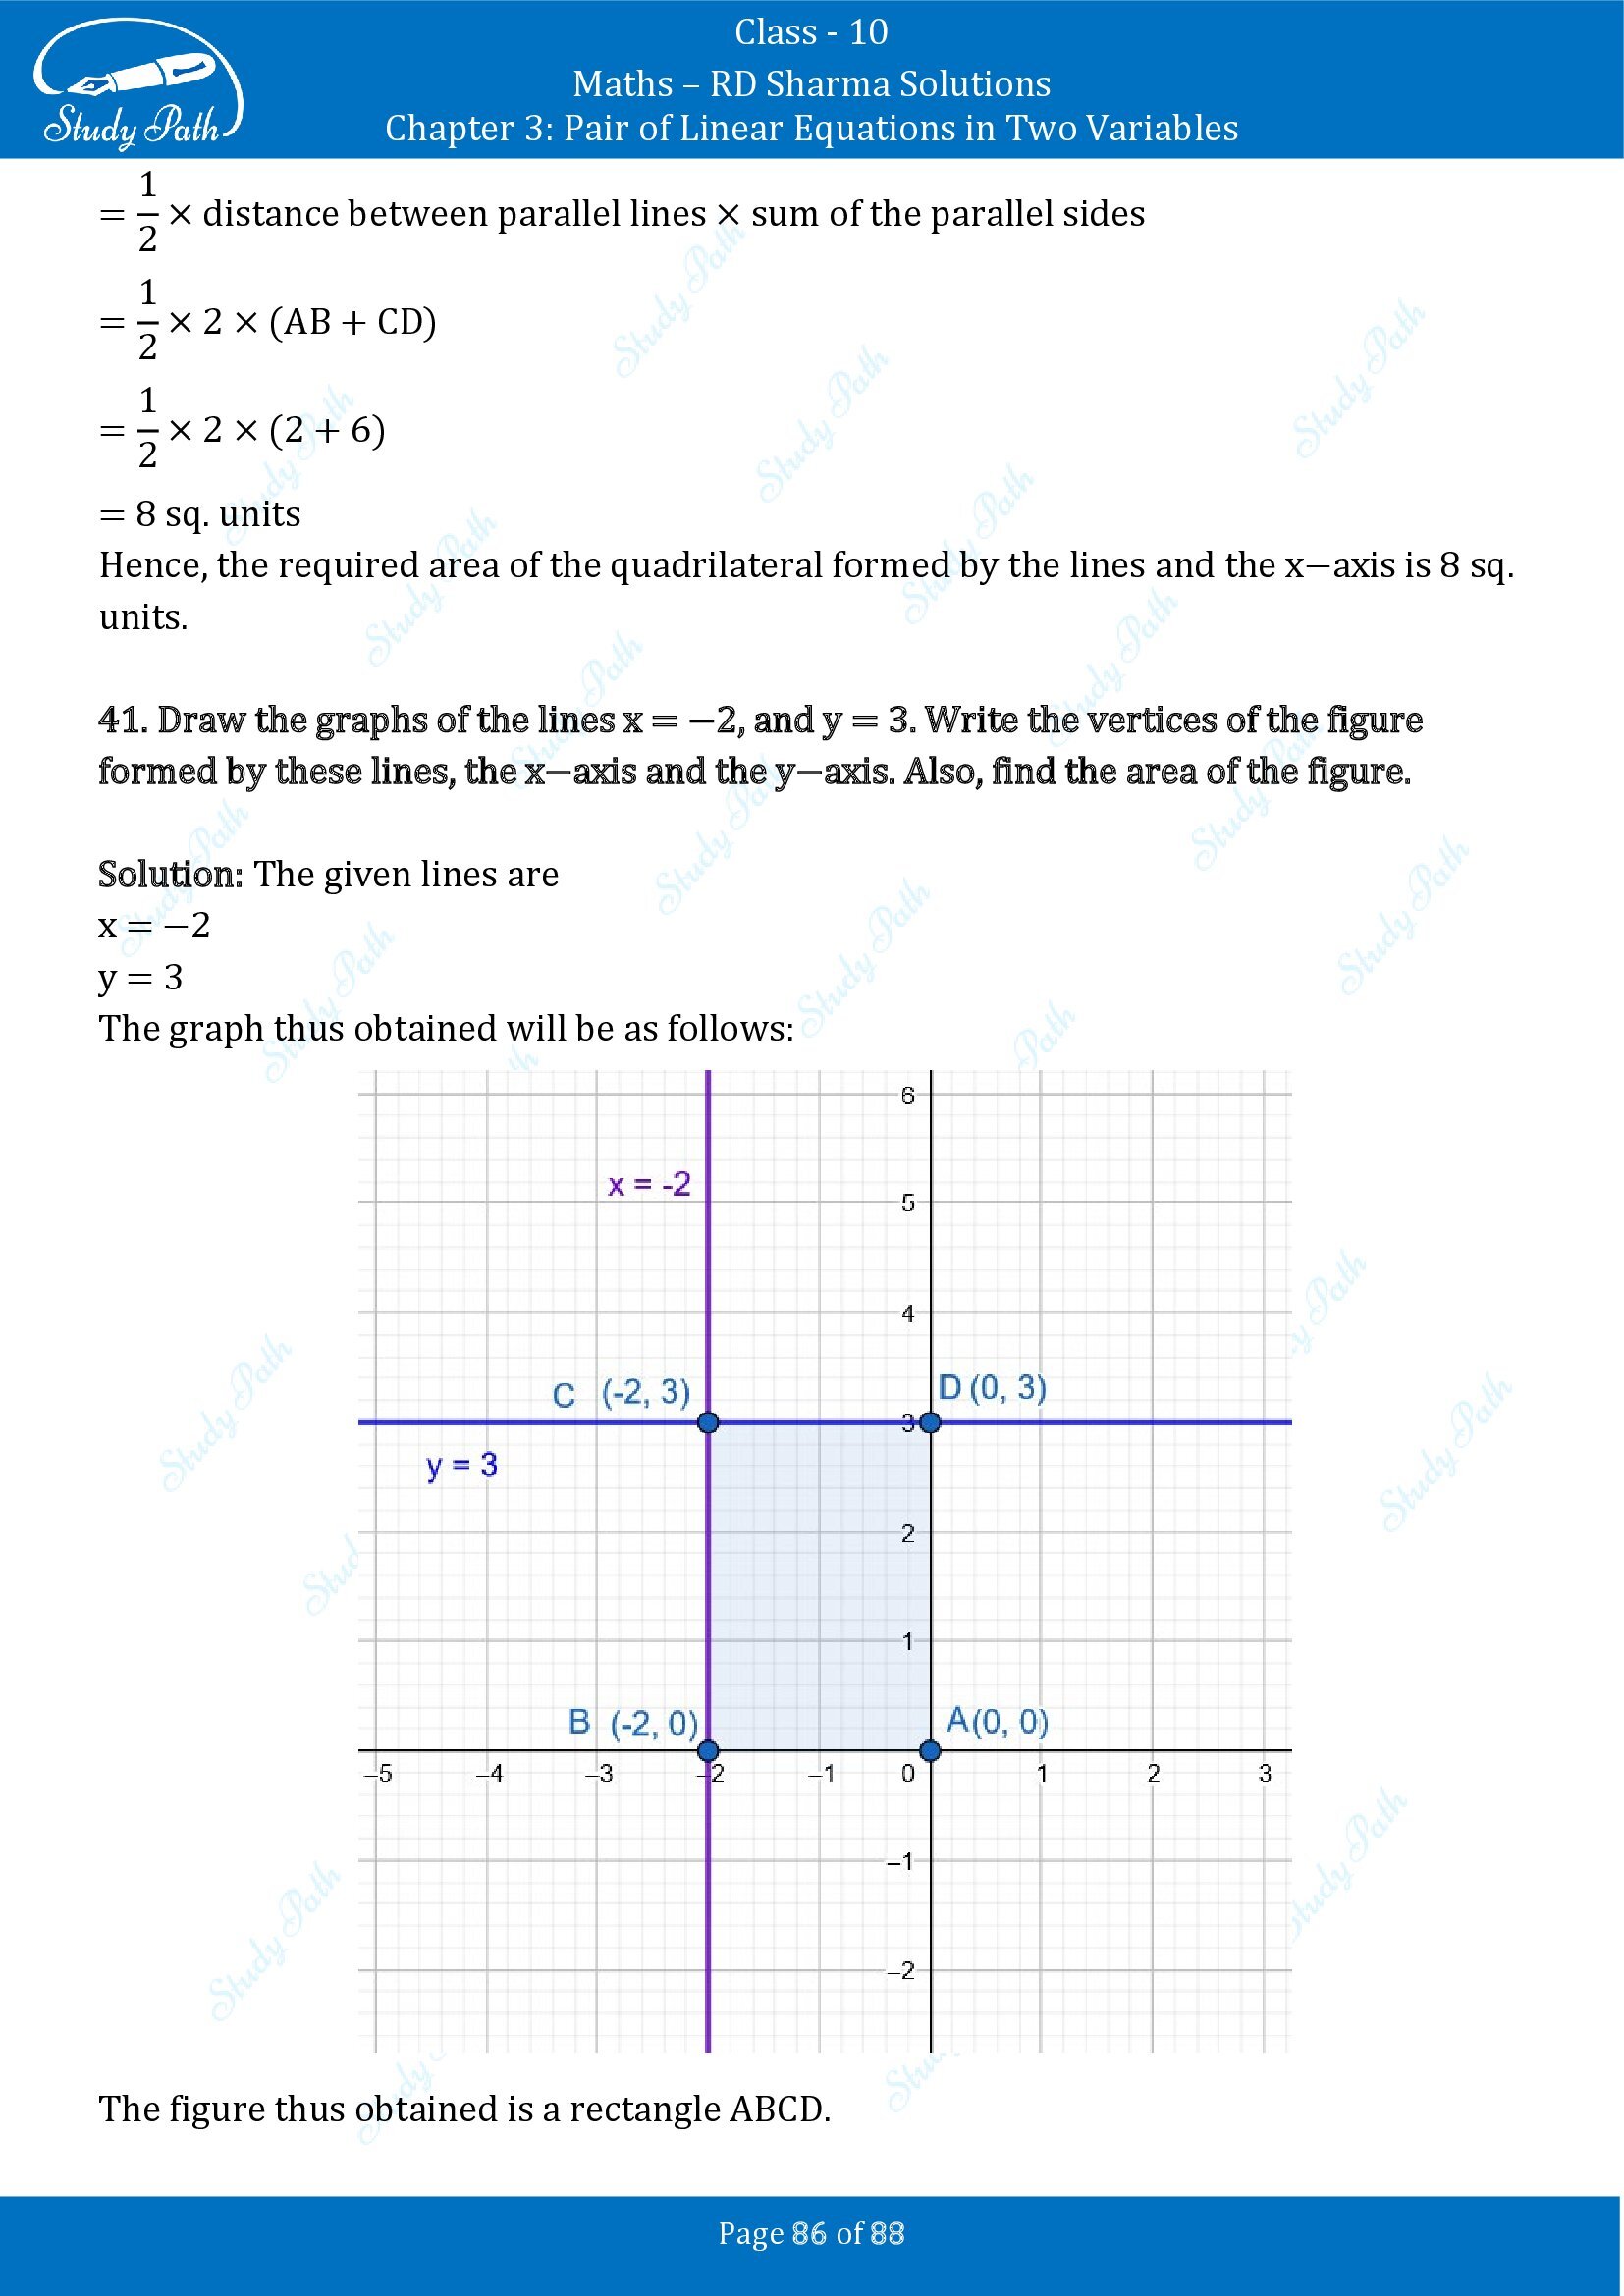 RD Sharma Solutions Class 10 Chapter 3 Pair of Linear Equations in Two Variables Exercise 3.2 00086